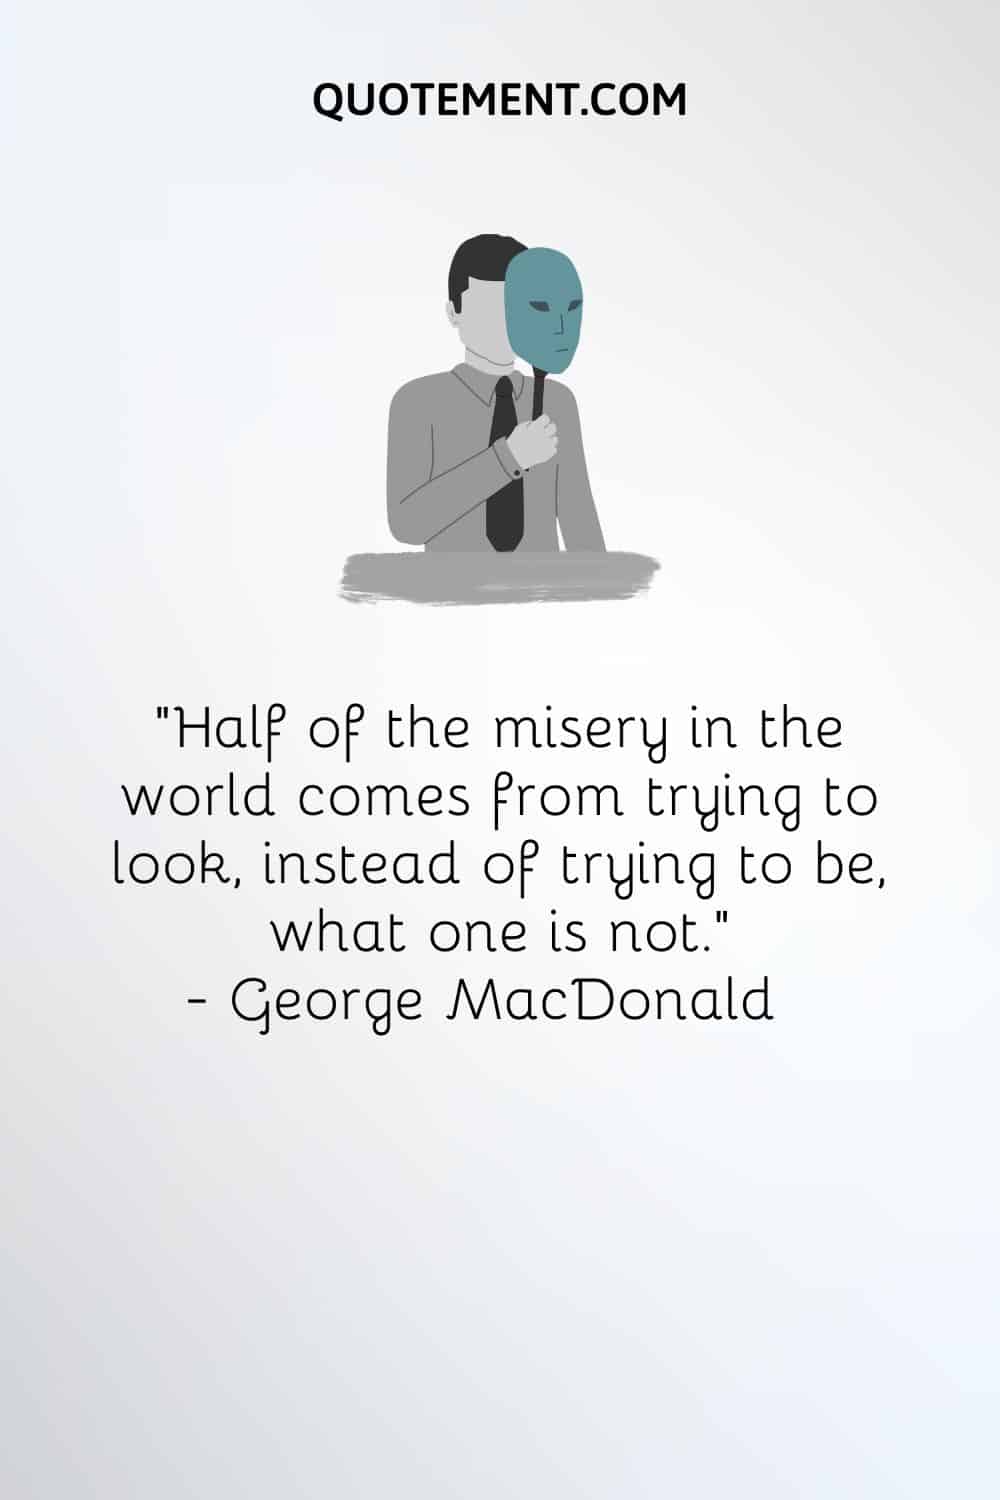 “Half of the misery in the world comes from trying to look, instead of trying to be, what one is not.” — George MacDonald